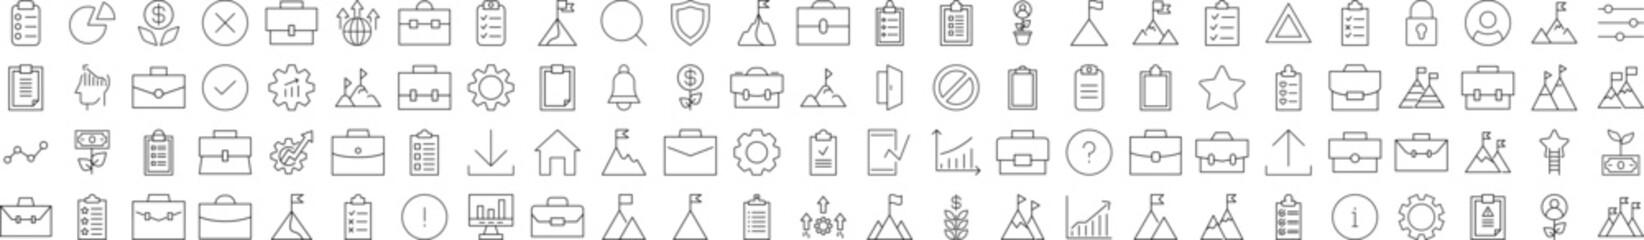 Business Outline Symbols. Linear Illustrations for web sites, apps, design, banners and other purposes